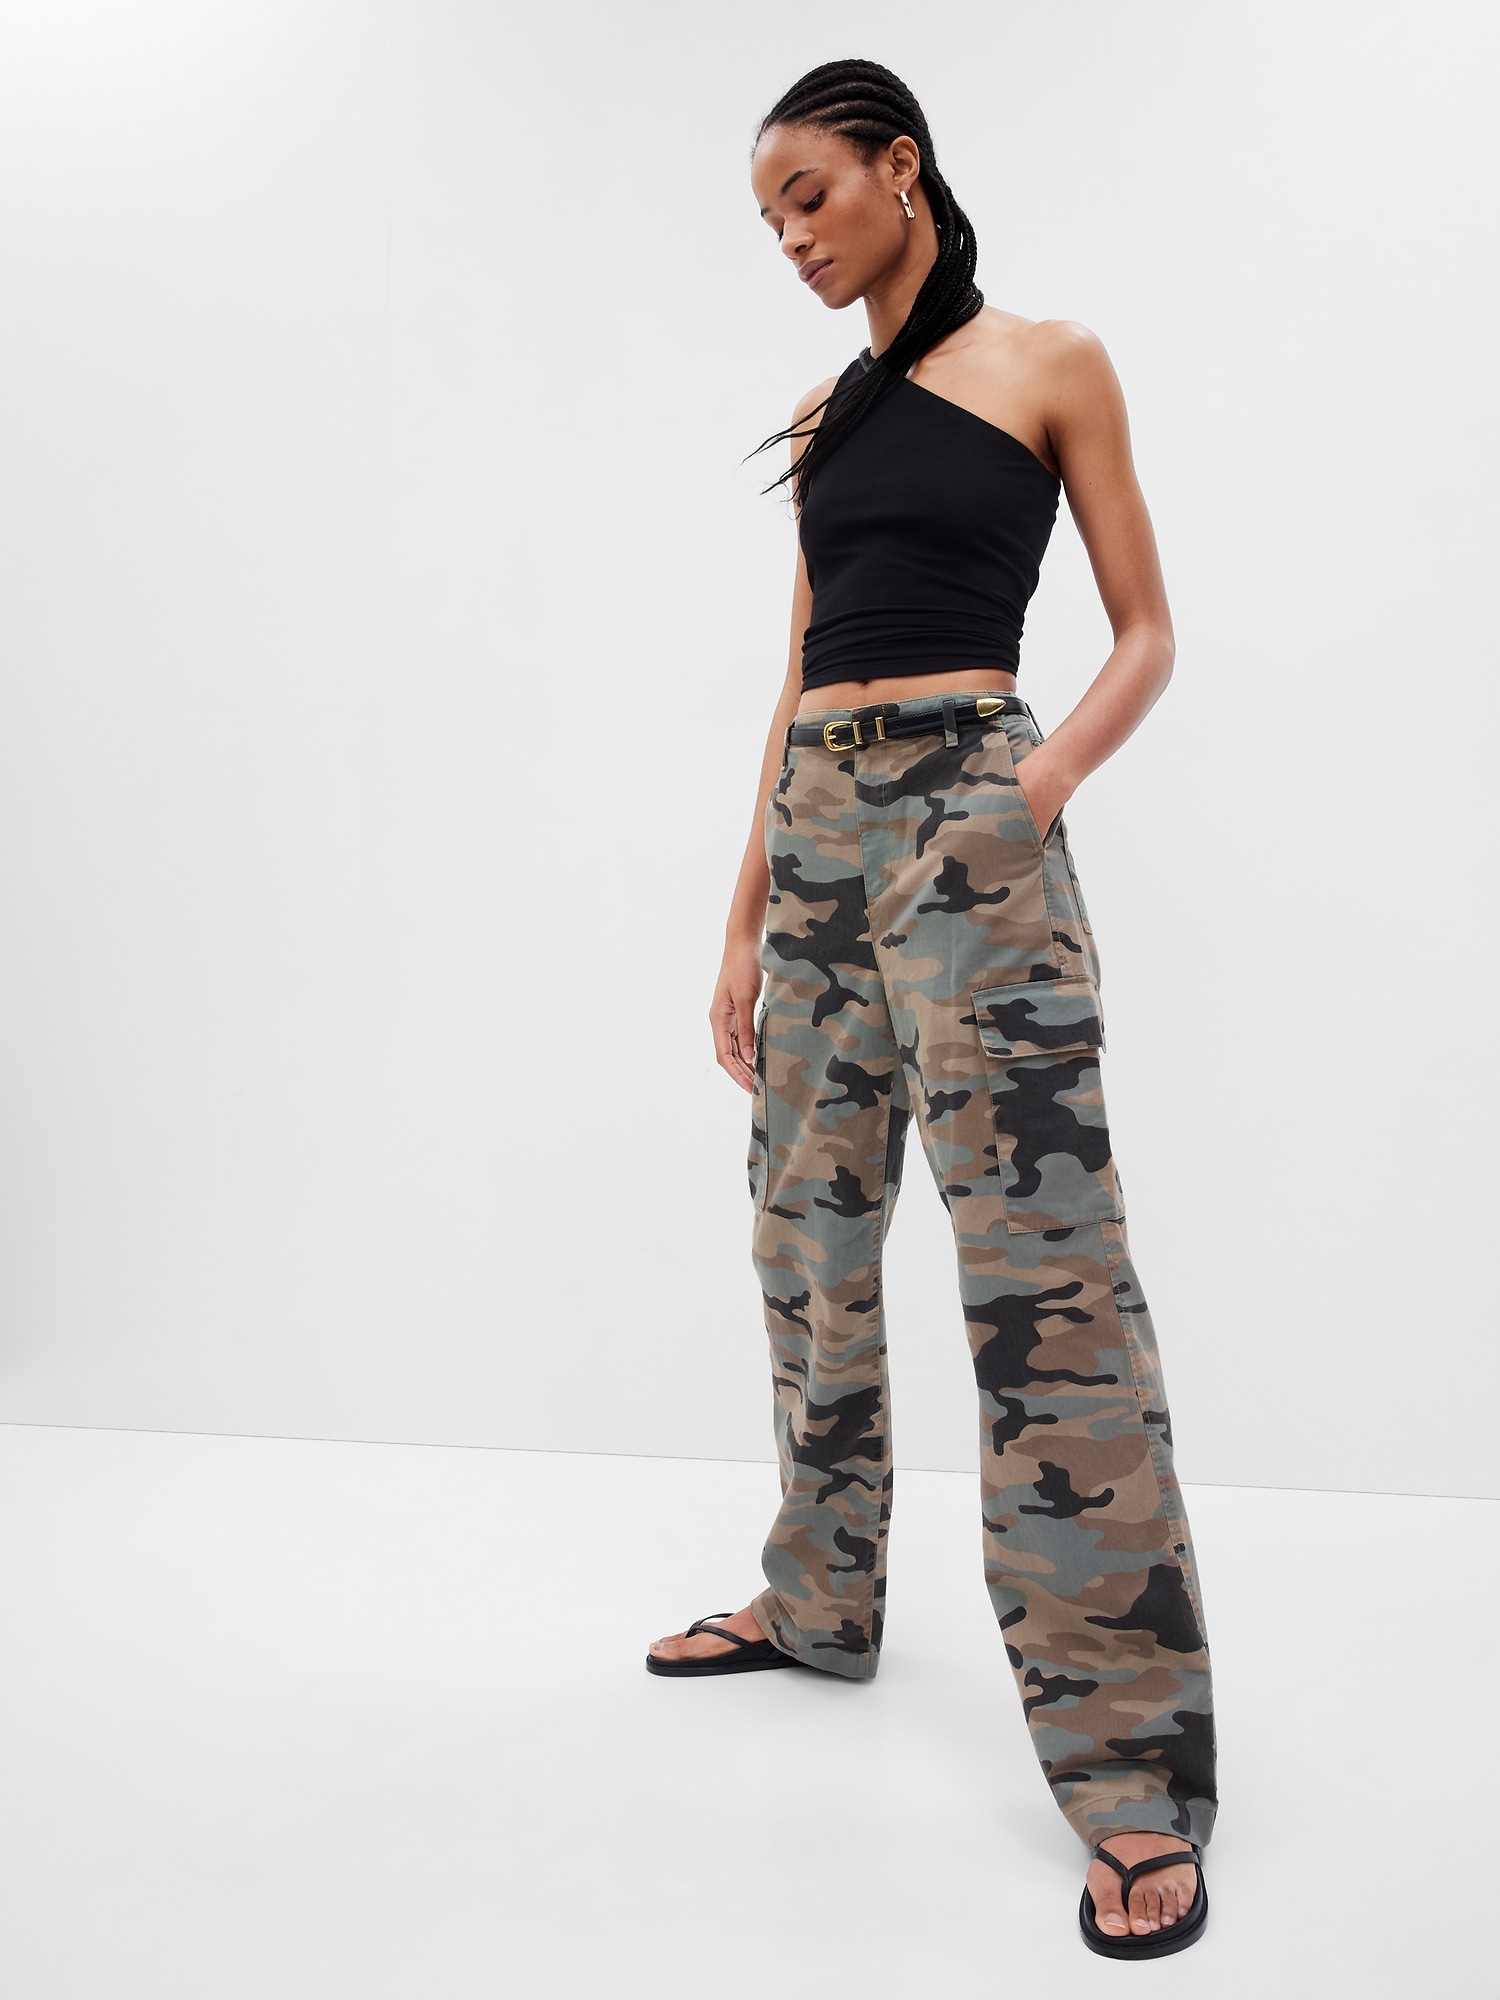 Women's Curve Love Relaxed Cargo Pant, Women's Bottoms